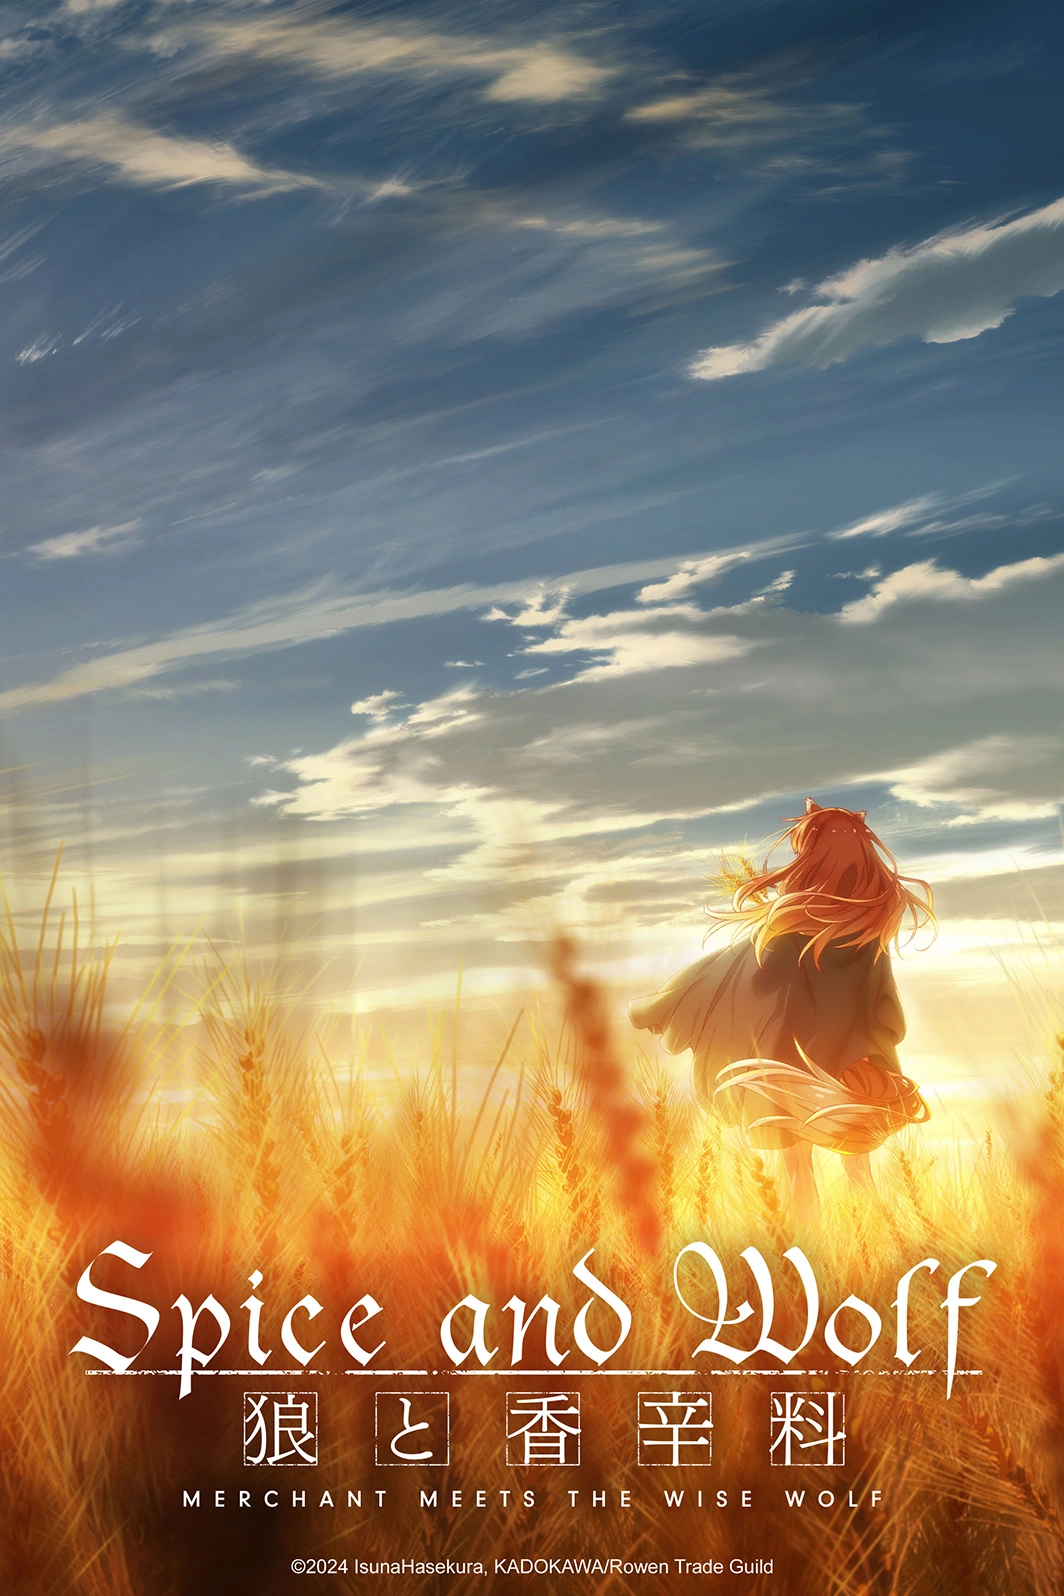 Spice and Wolf: Merchant Meets the Wise Wolf Anime Announces Its Release Date